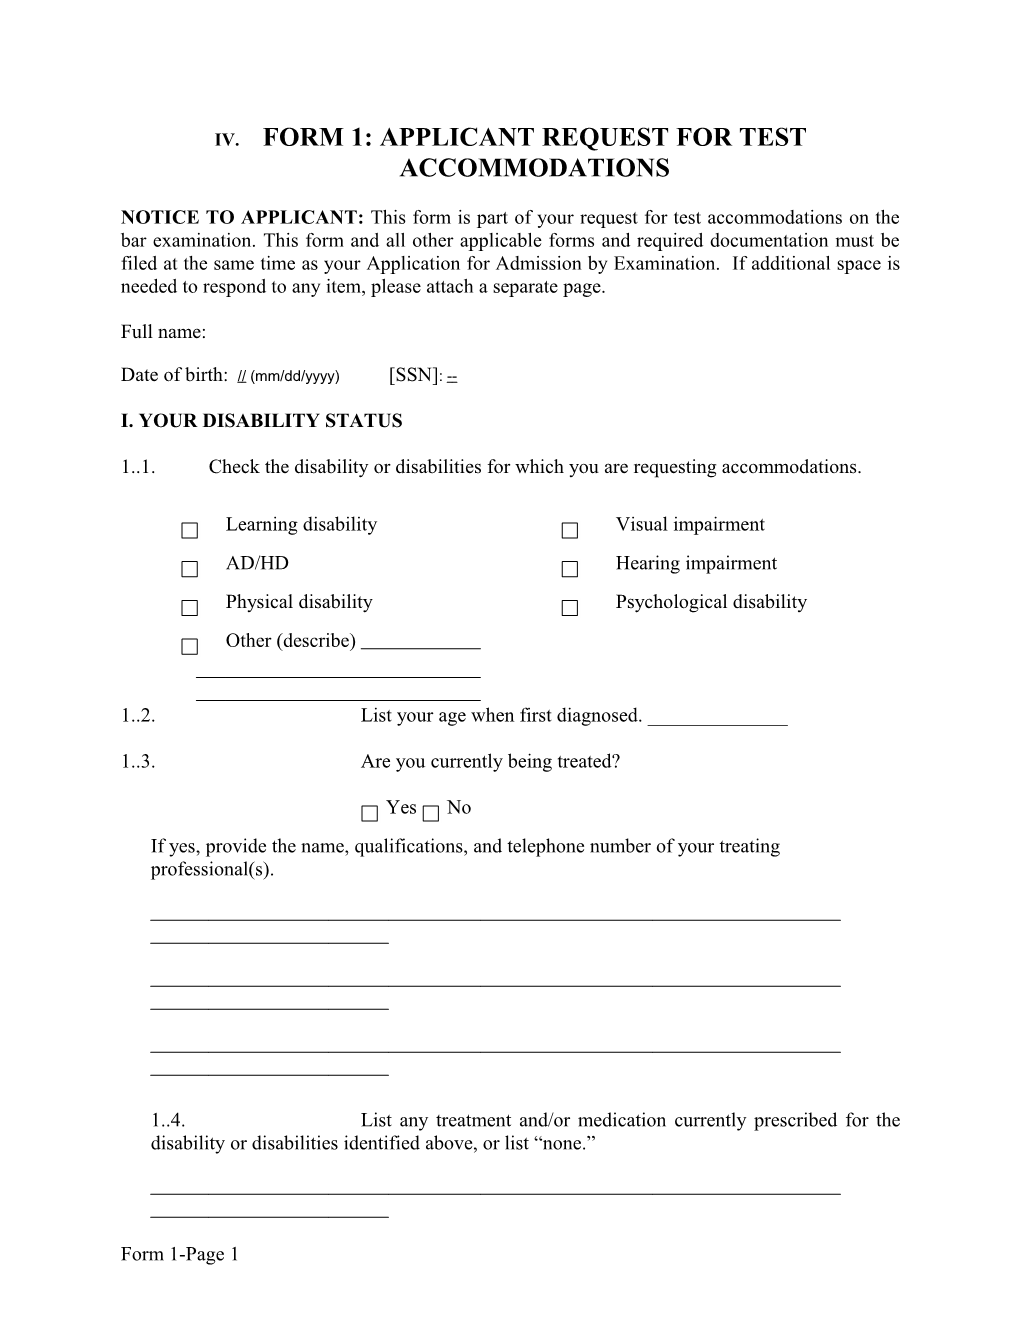 Form 1: Applicant Request for Test Accommodations